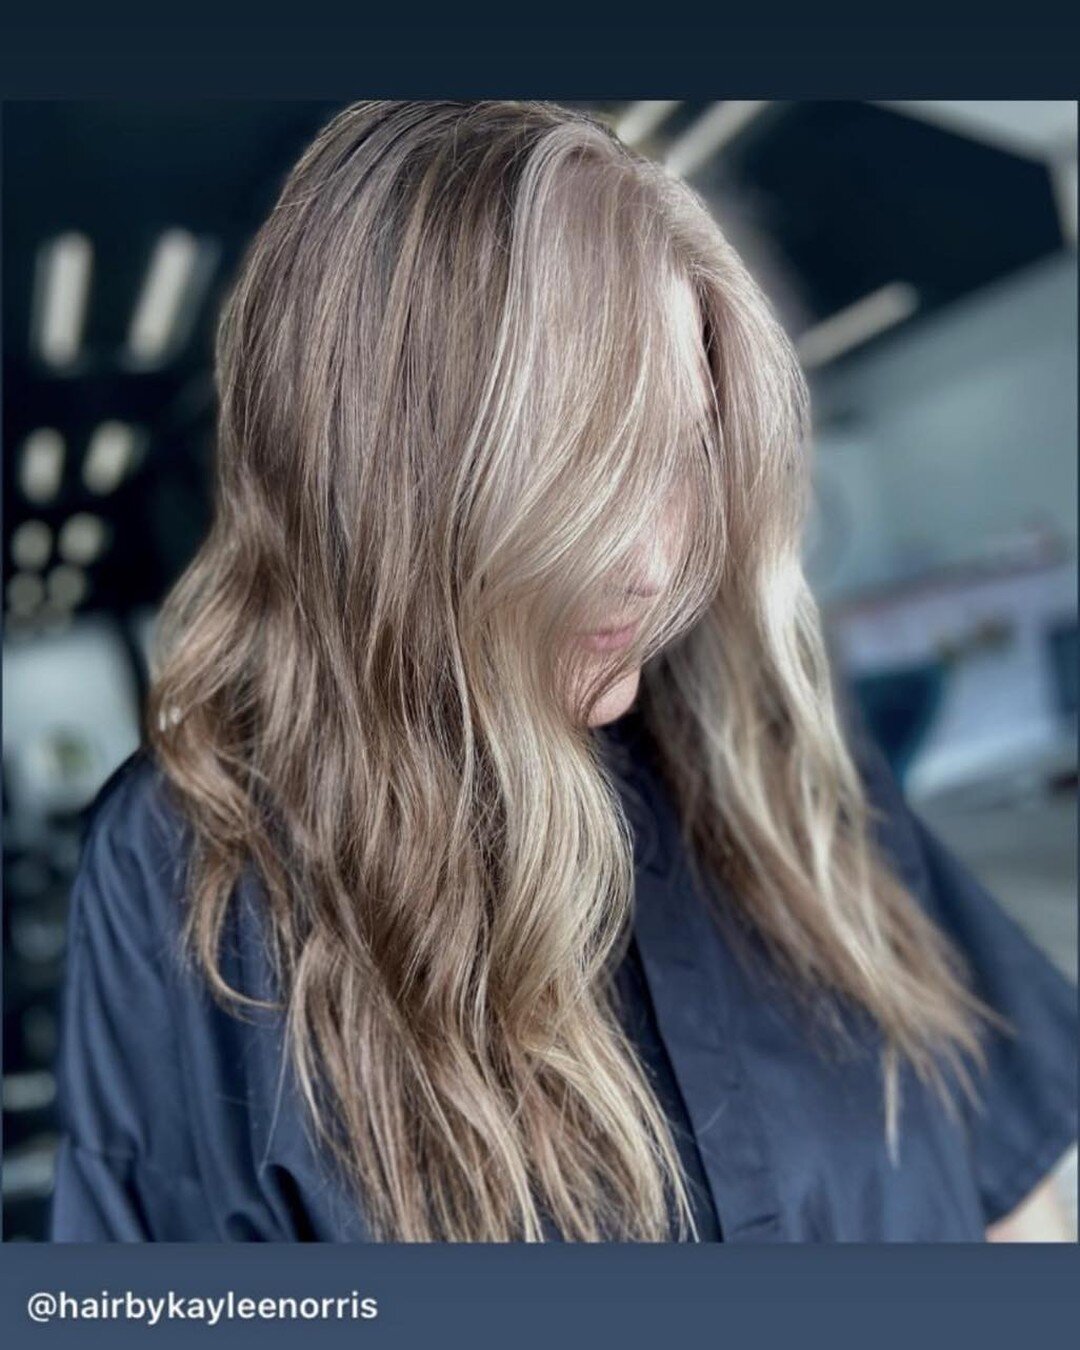 &ldquo;Hairdressers are a wonderful breed. You work one on one is another human being and the object is to make them feel so much better&rdquo;

Beautiful color by Kaylee Norris